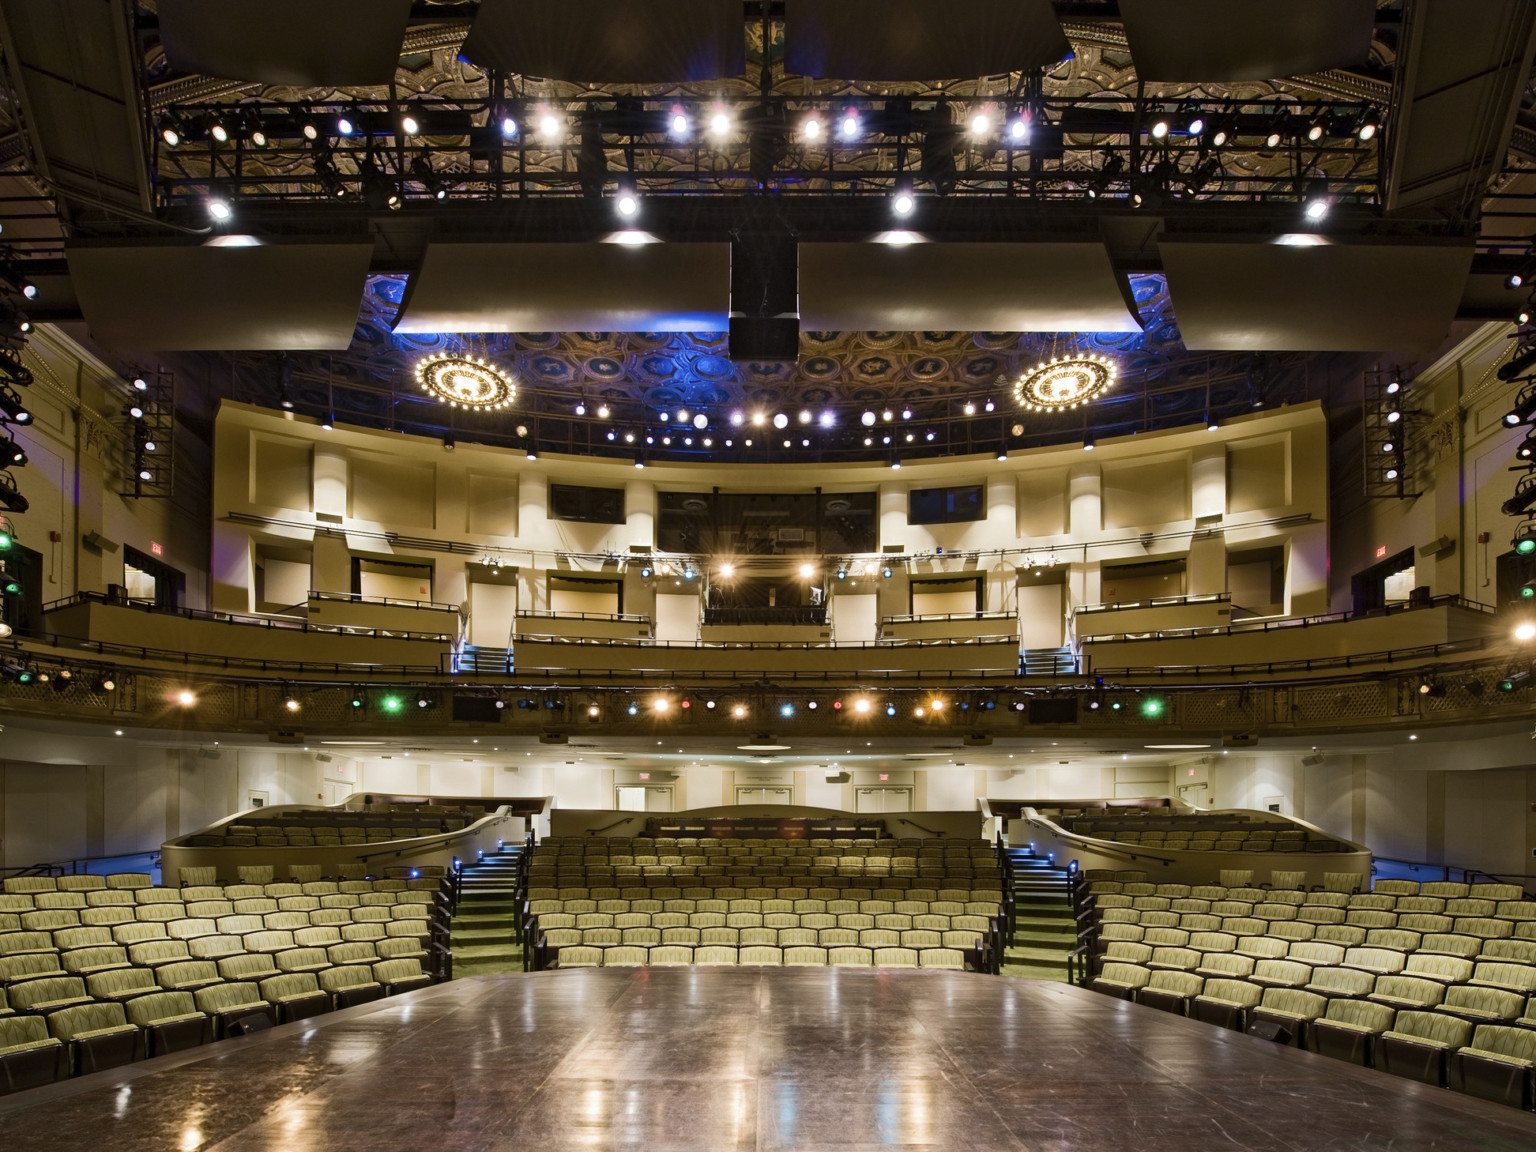 The Hanna Theater viewed from stage looking towards yellow patterned theater seats and balcony. Lighting systems frames stage